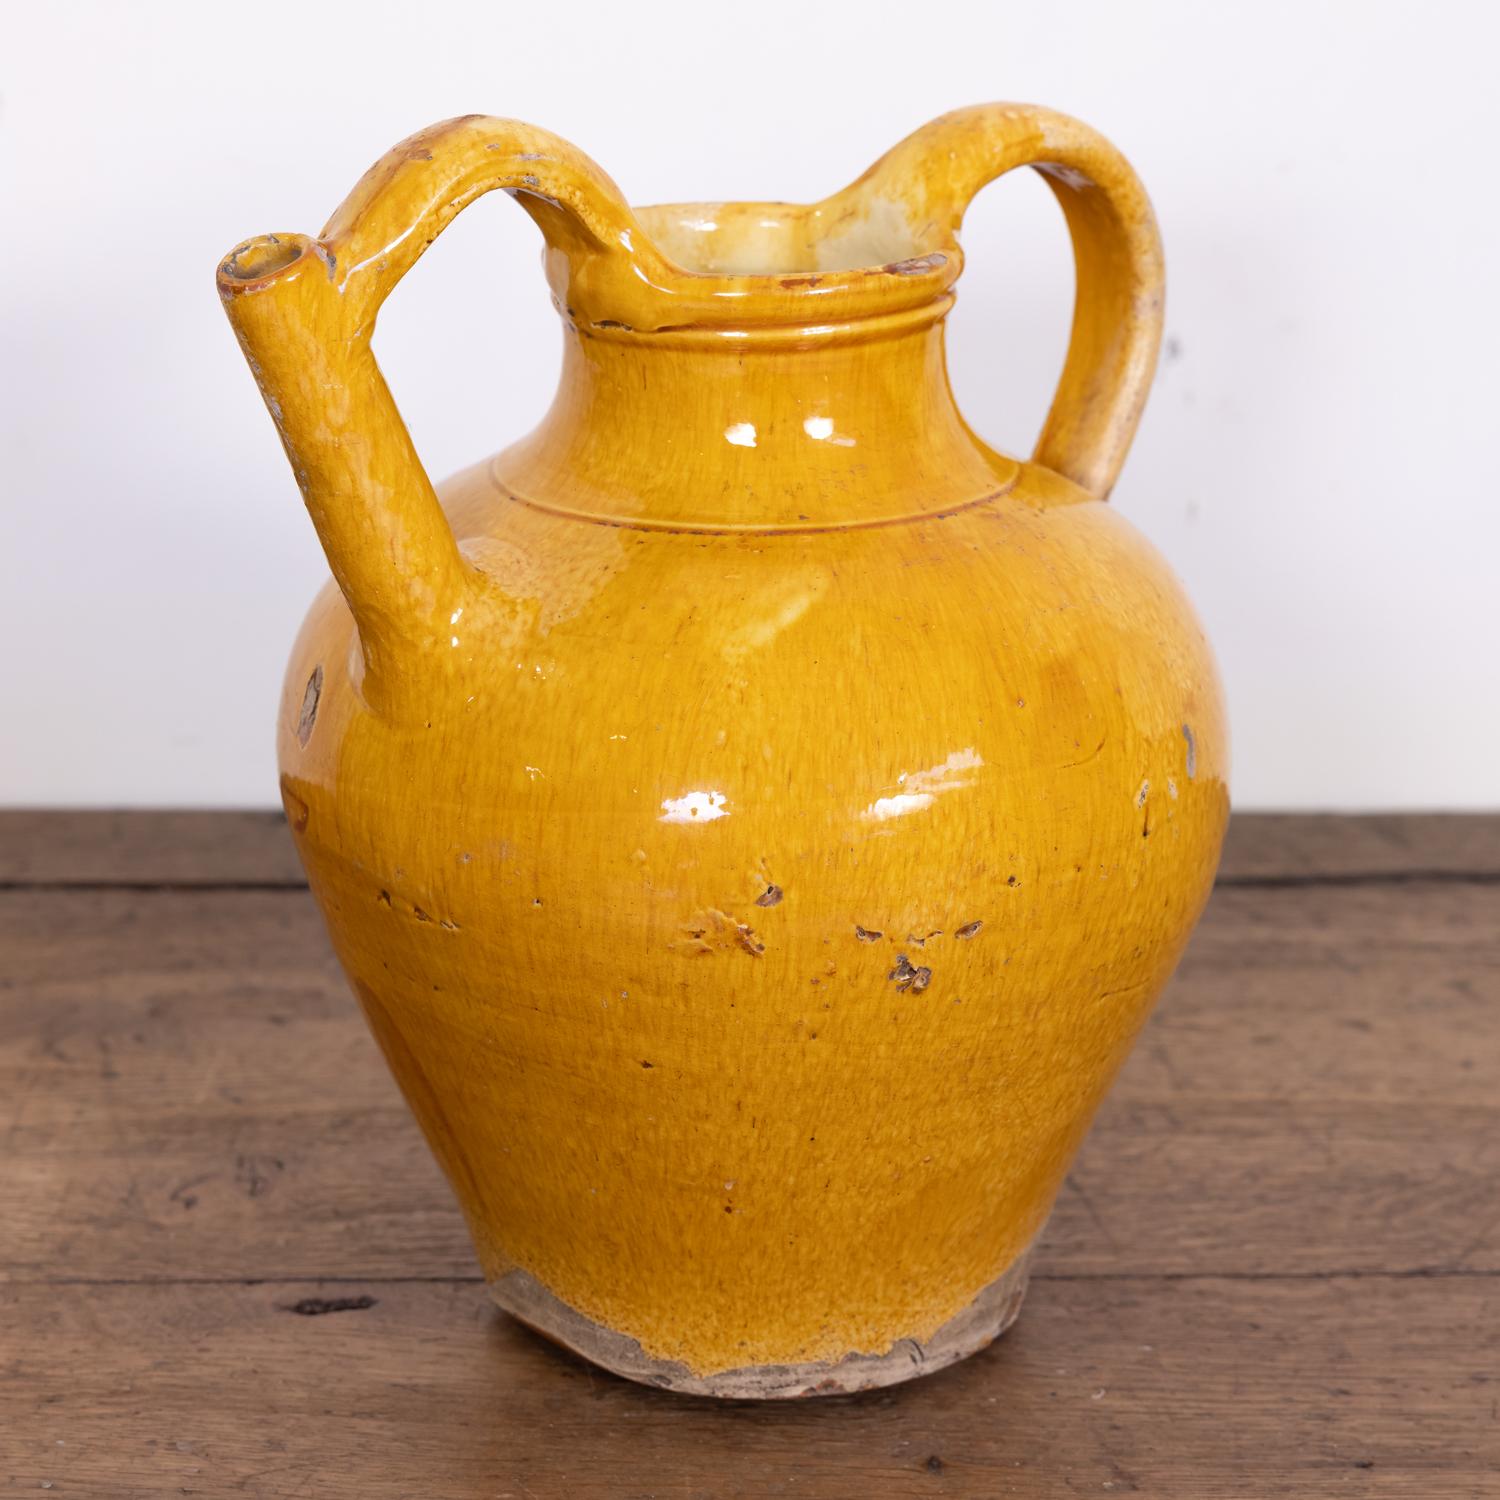 Terracotta Large 19th Century French Cruche Orjol or Water Jug with Yellow Glaze